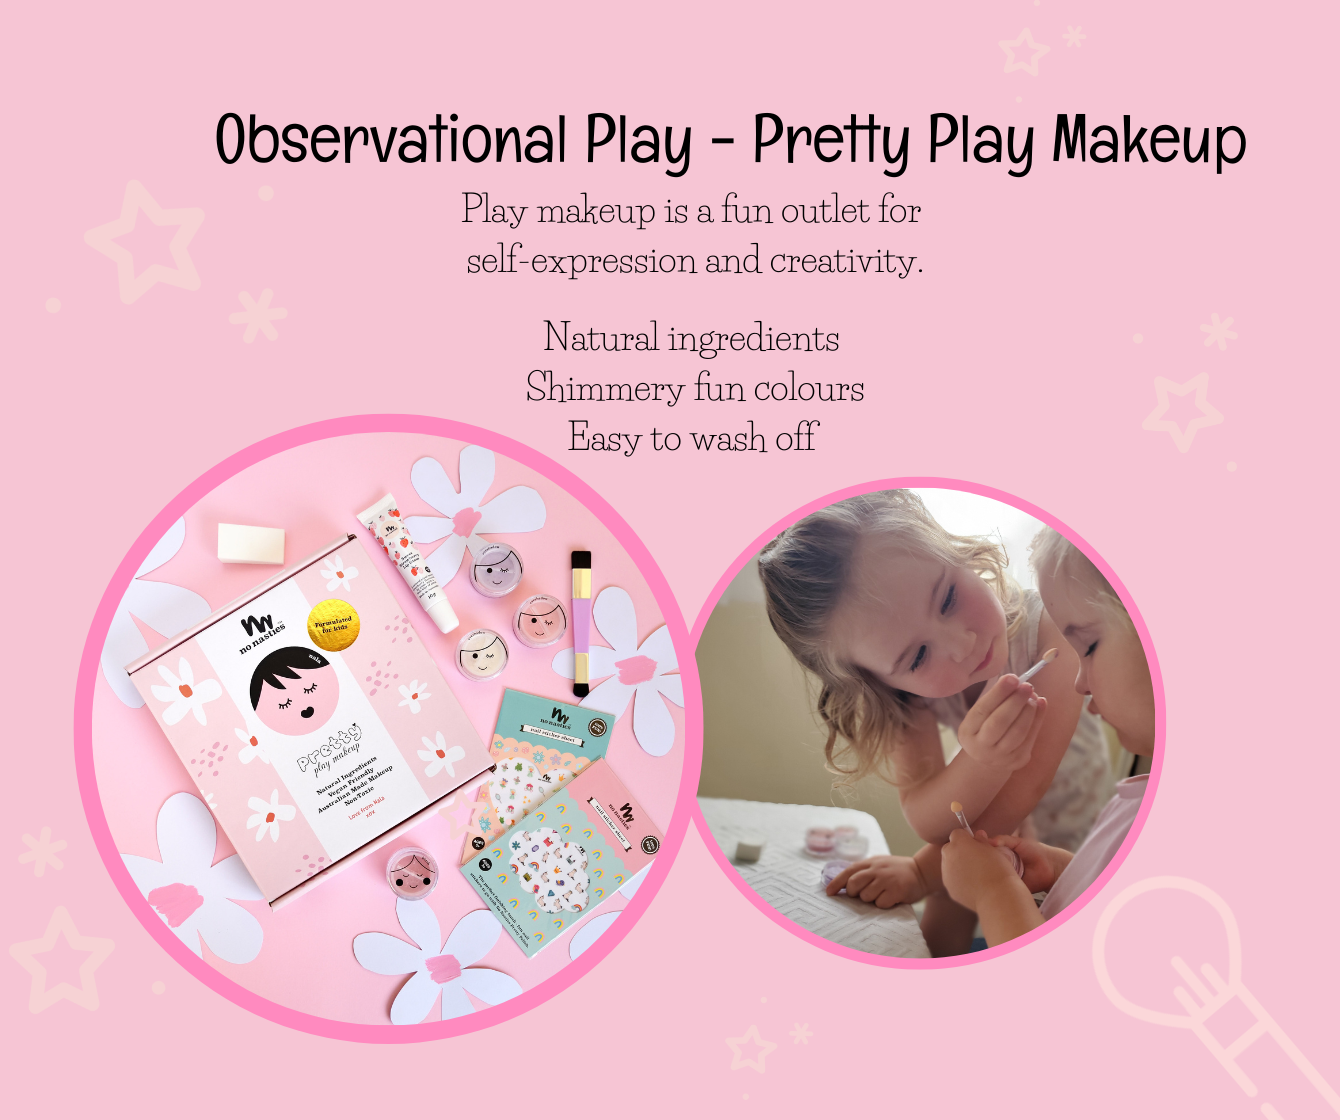 Fun play ideas for kids with play makeup